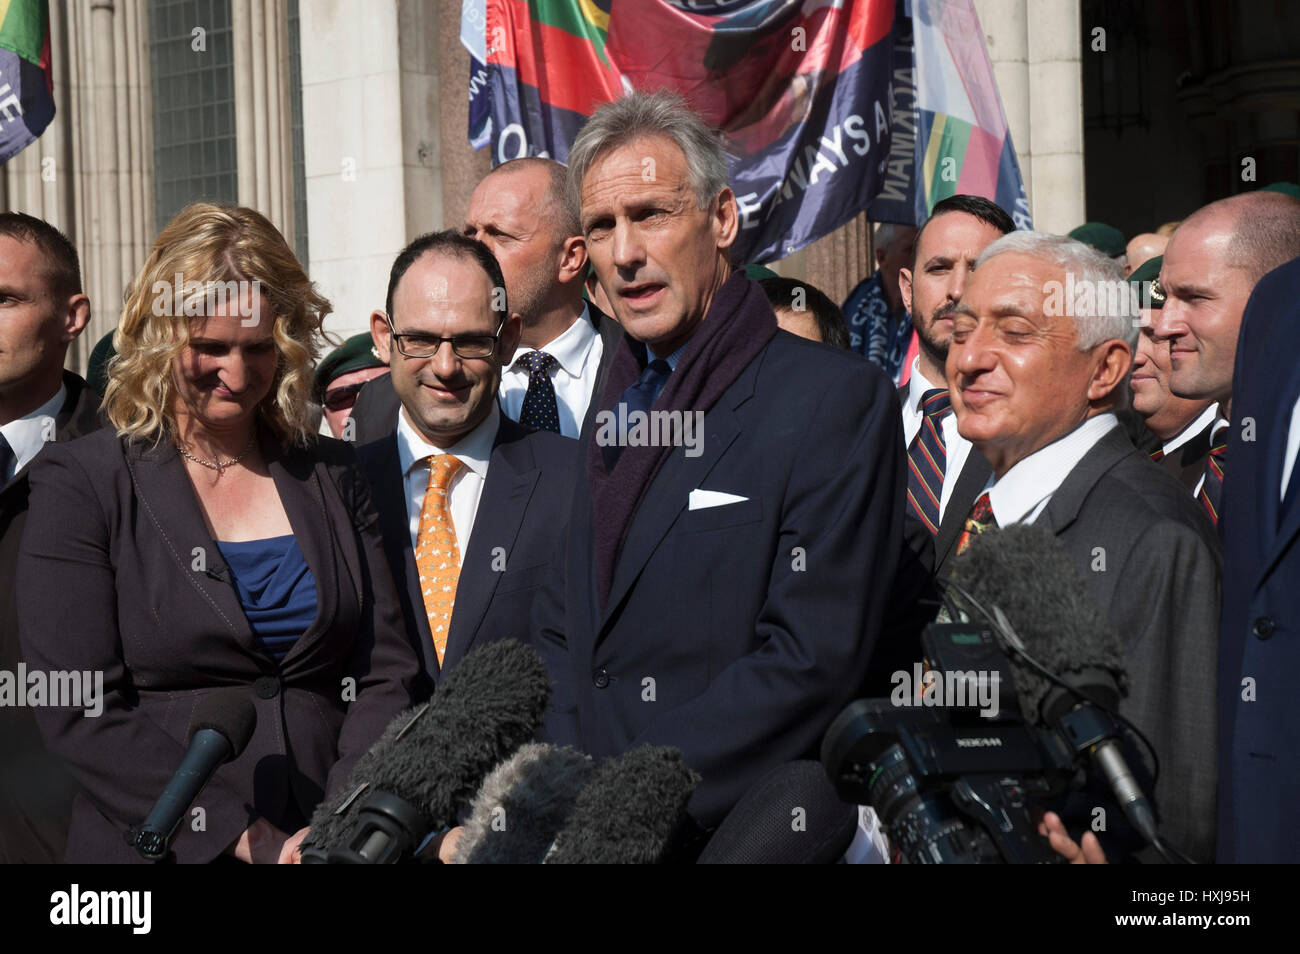 London, UK. 28th Mar, 2017. Supporters of marine Alexander Blackman. Claire Blackman wife of marine Alexander Blackman after his sentence at Royal Court. Credit: JOHNNY ARMSTEAD/Alamy Live News Stock Photo